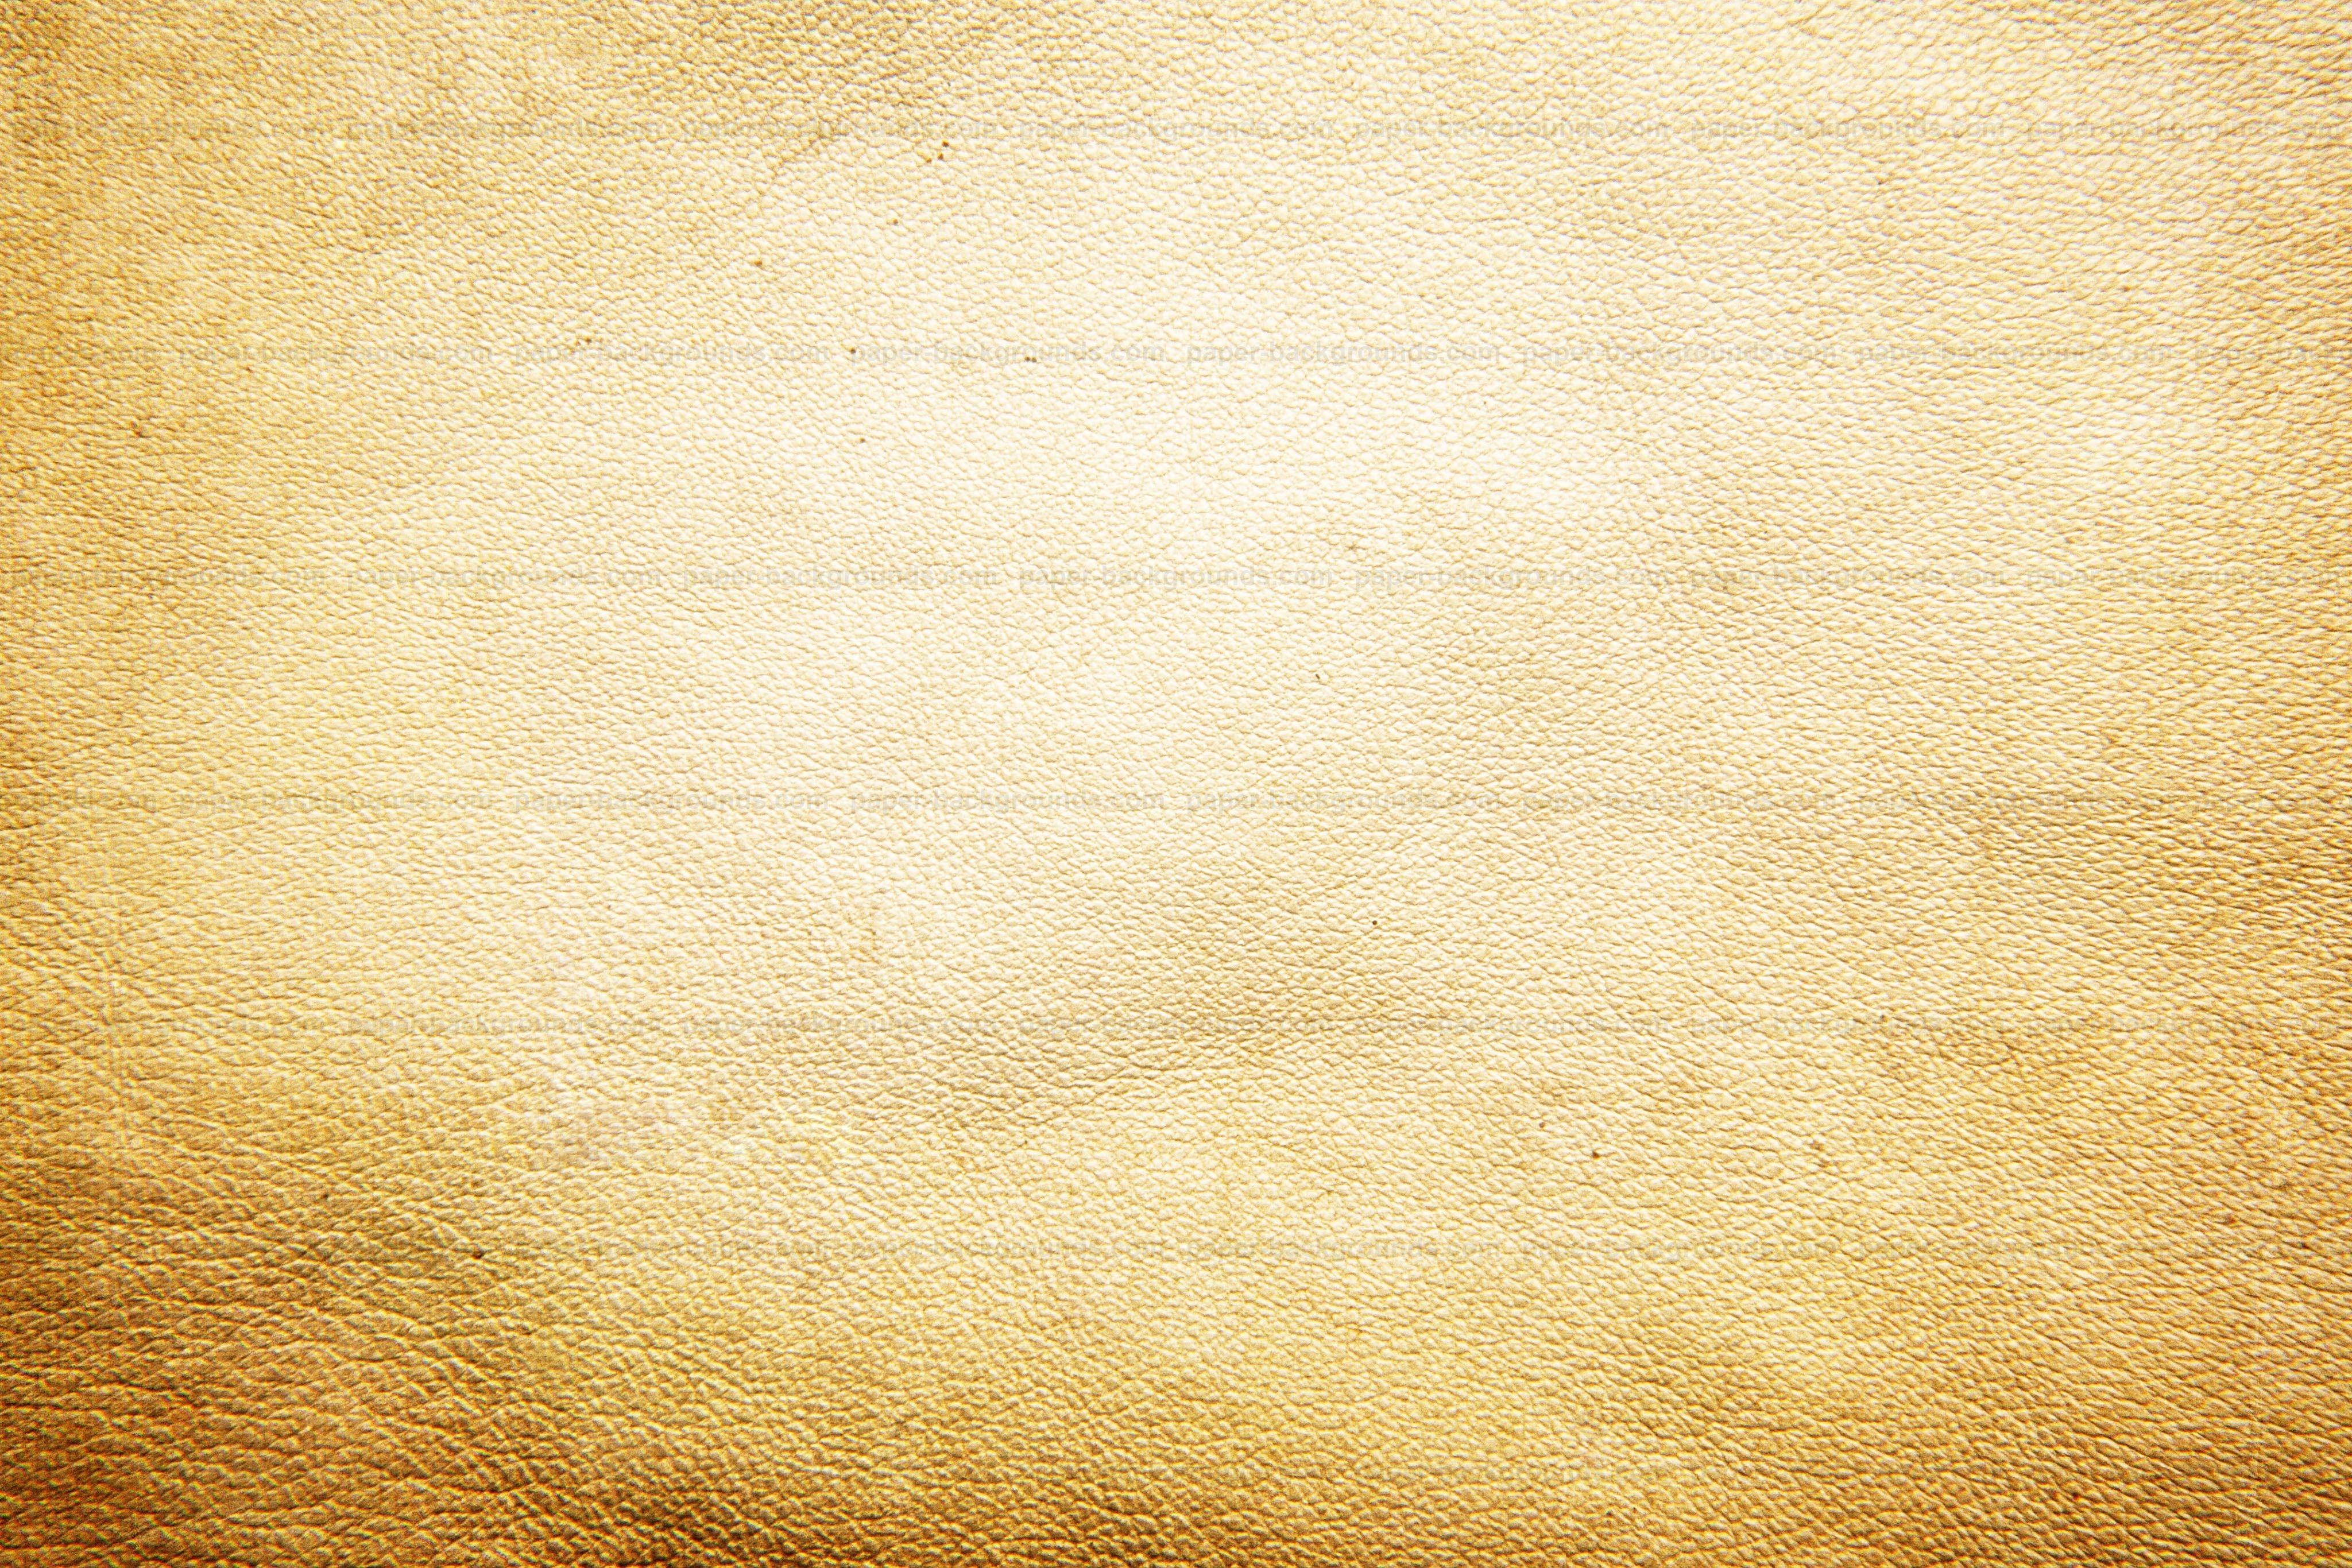 Paper Background. Grunge Leather Background Texture